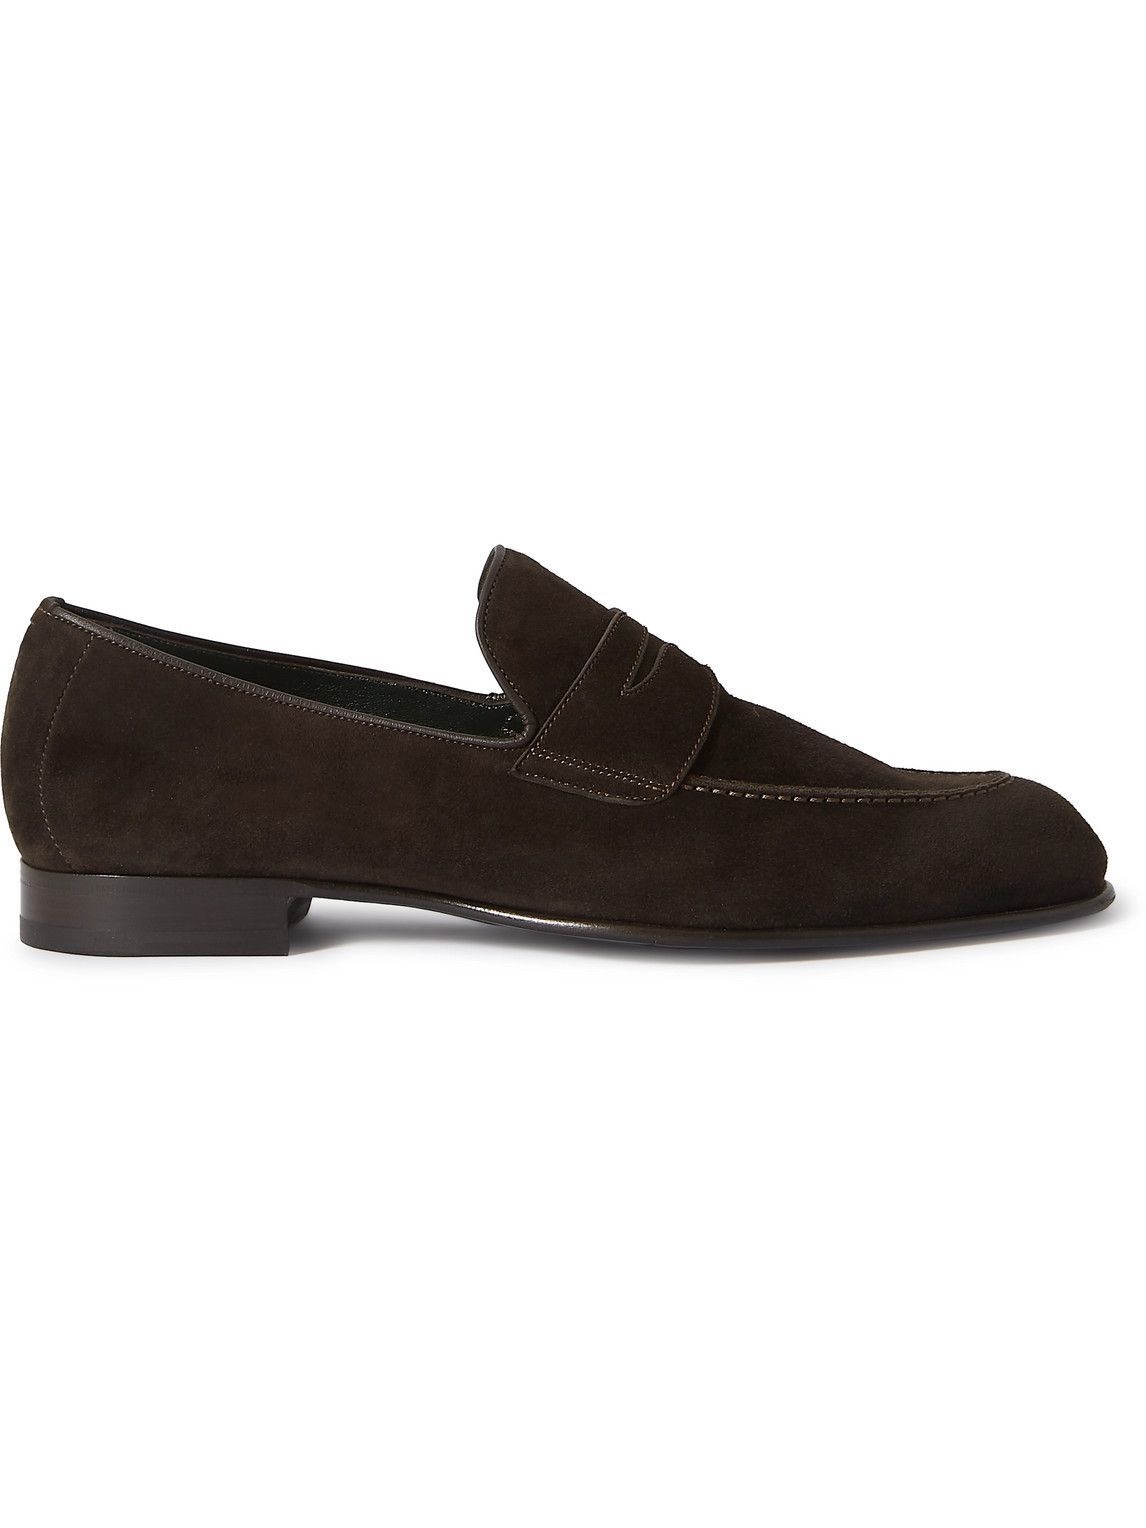 Brioni - Leather-Trimmed Suede Penny Loafers - Brown Brioni